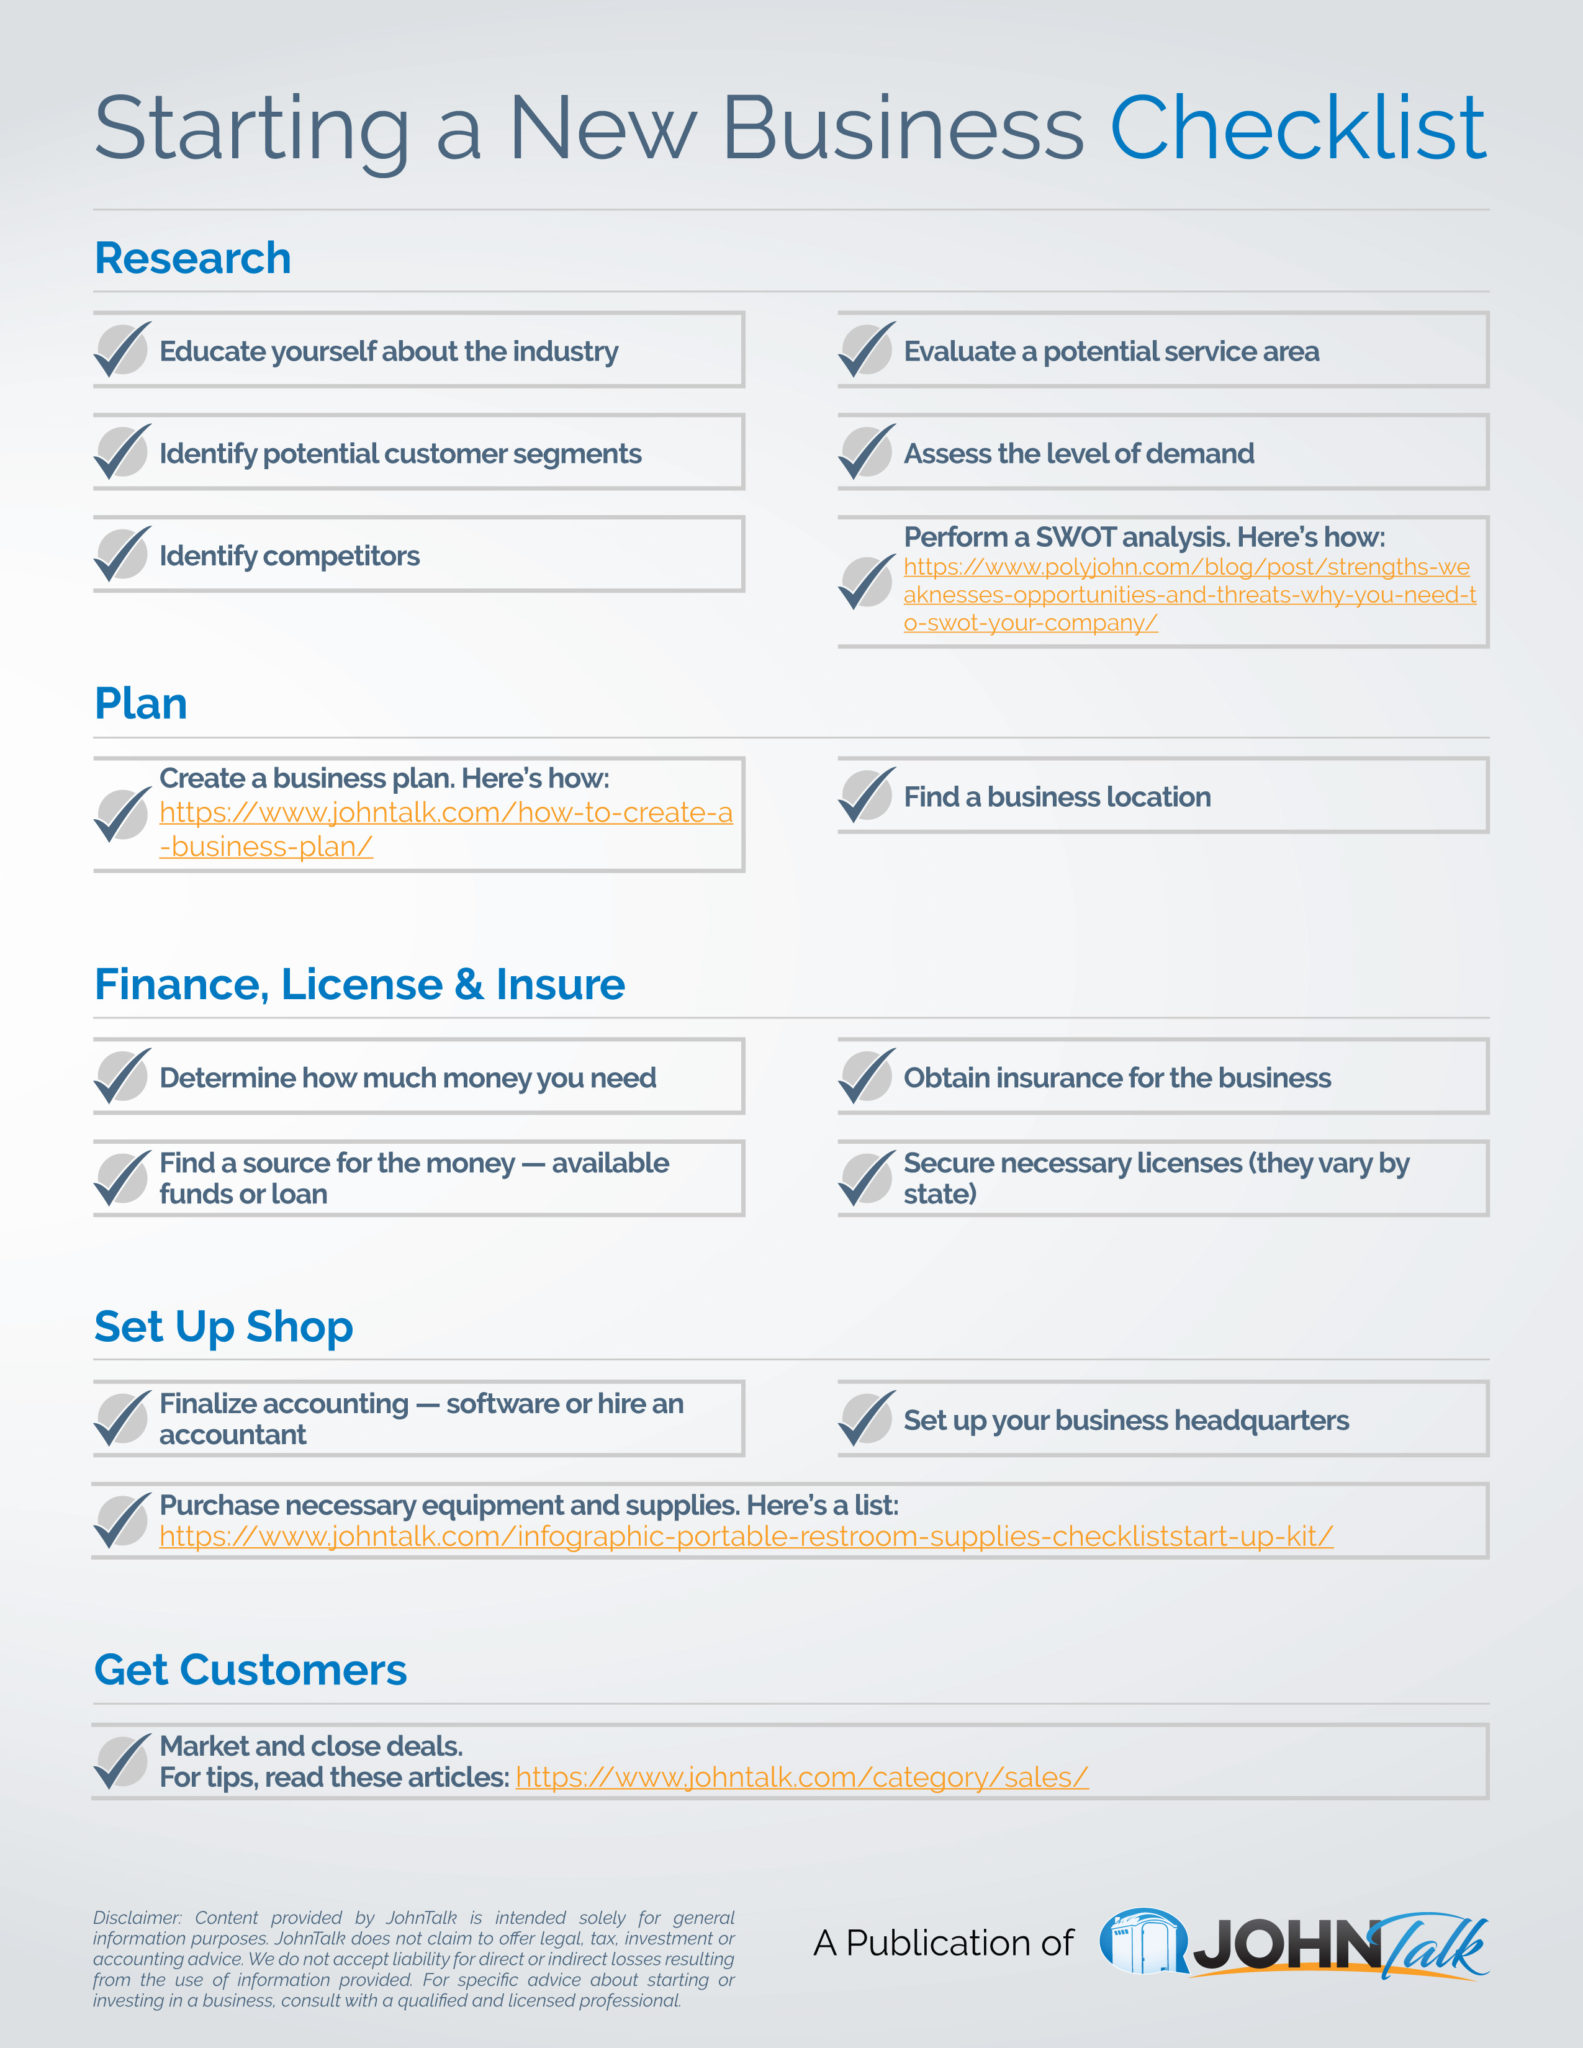 INFOGRAPHIC: Starting a New Business Checklist JohnTalk